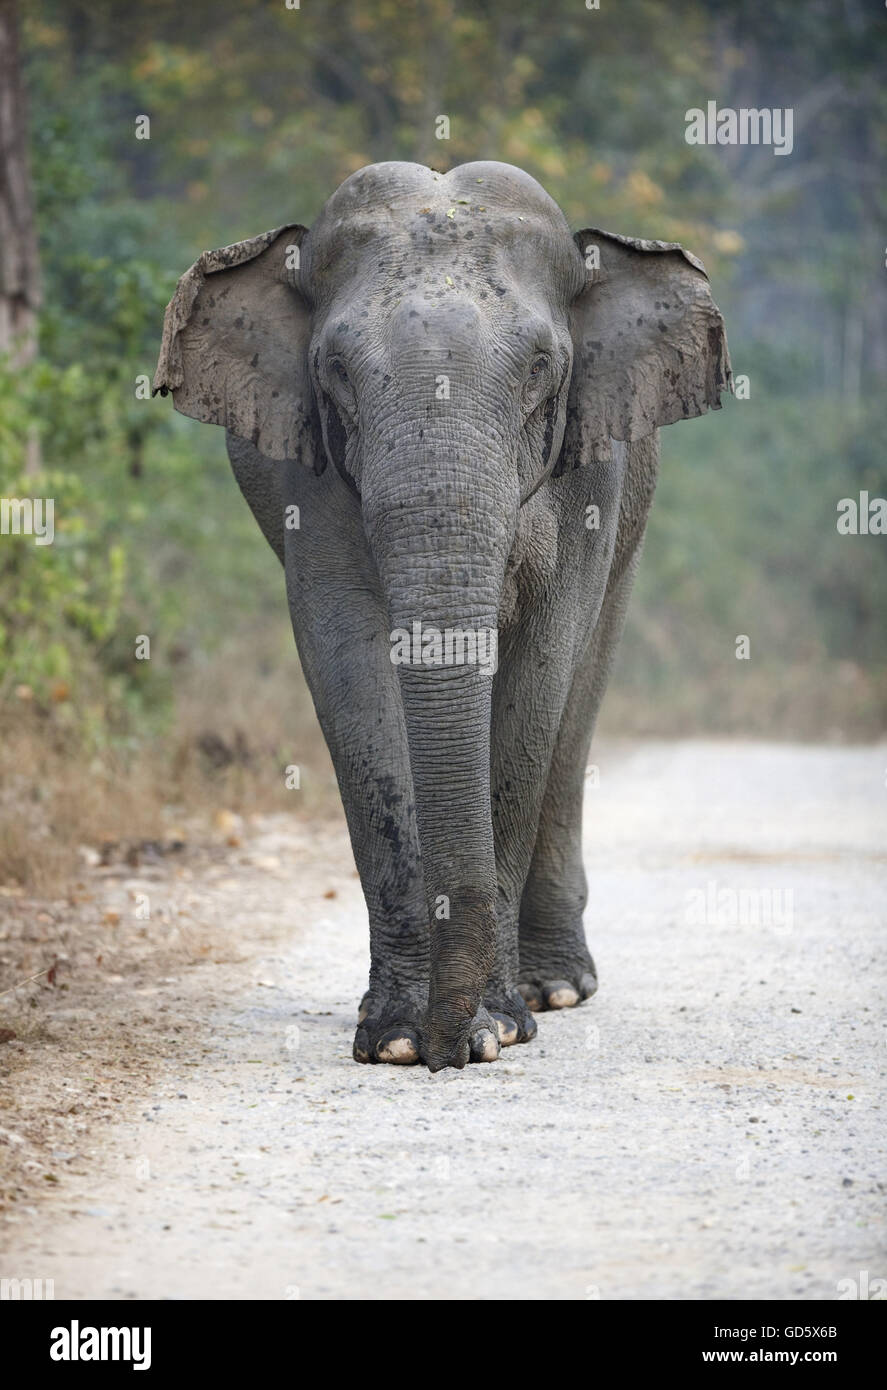 An elephant walking on the road Stock Photo